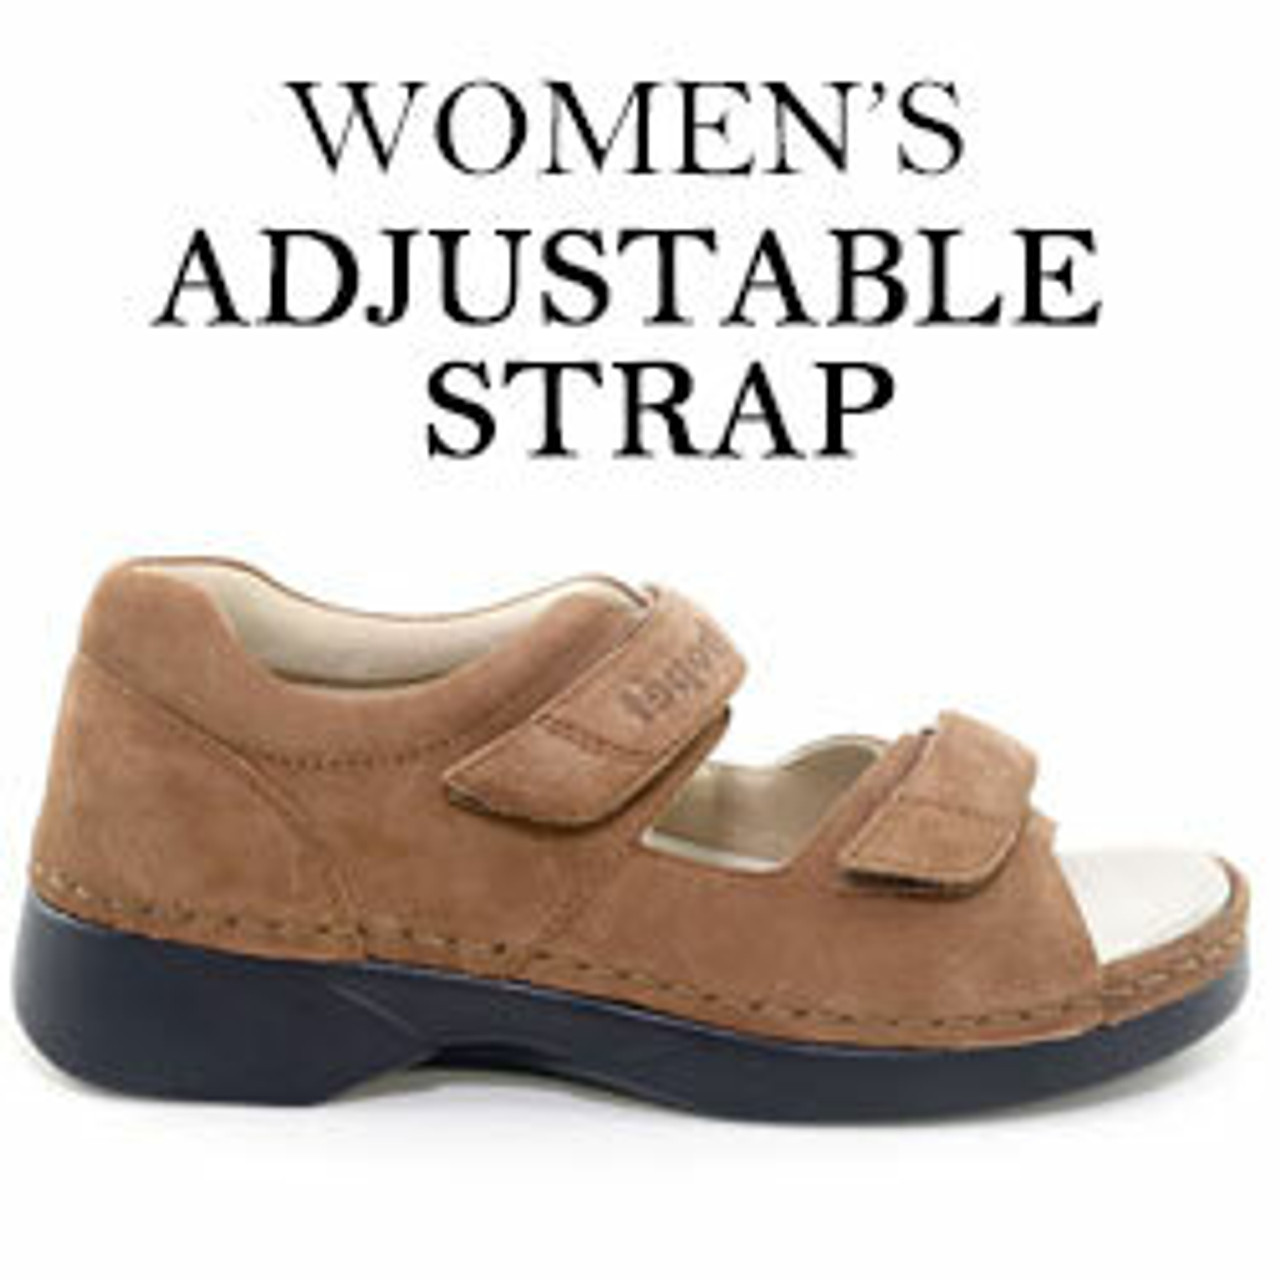 Adjustable Sandals, Slippers & Boots for Women